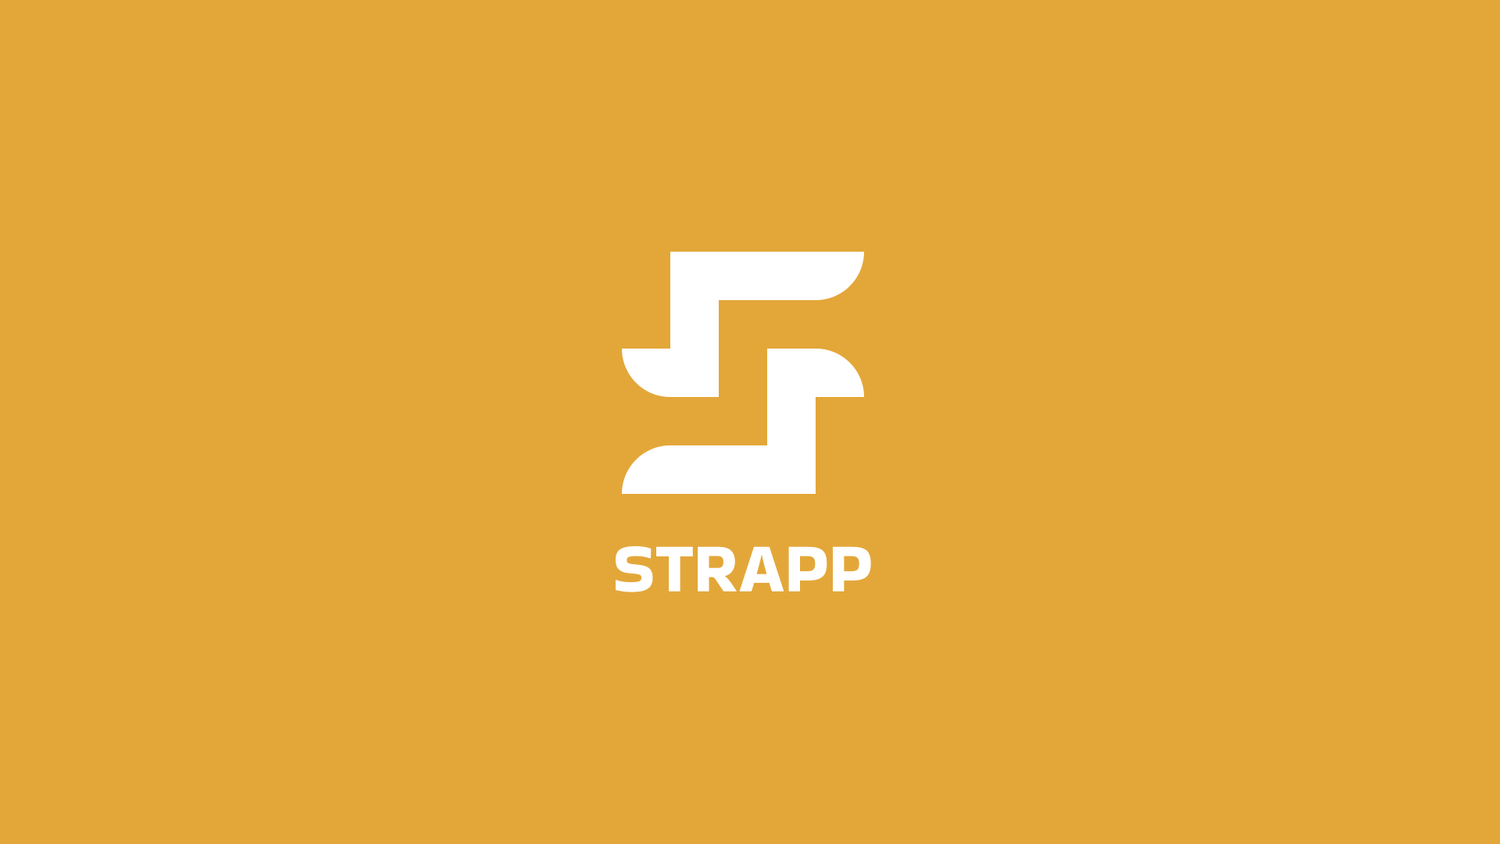 STRAPP Logo on solid yellow background